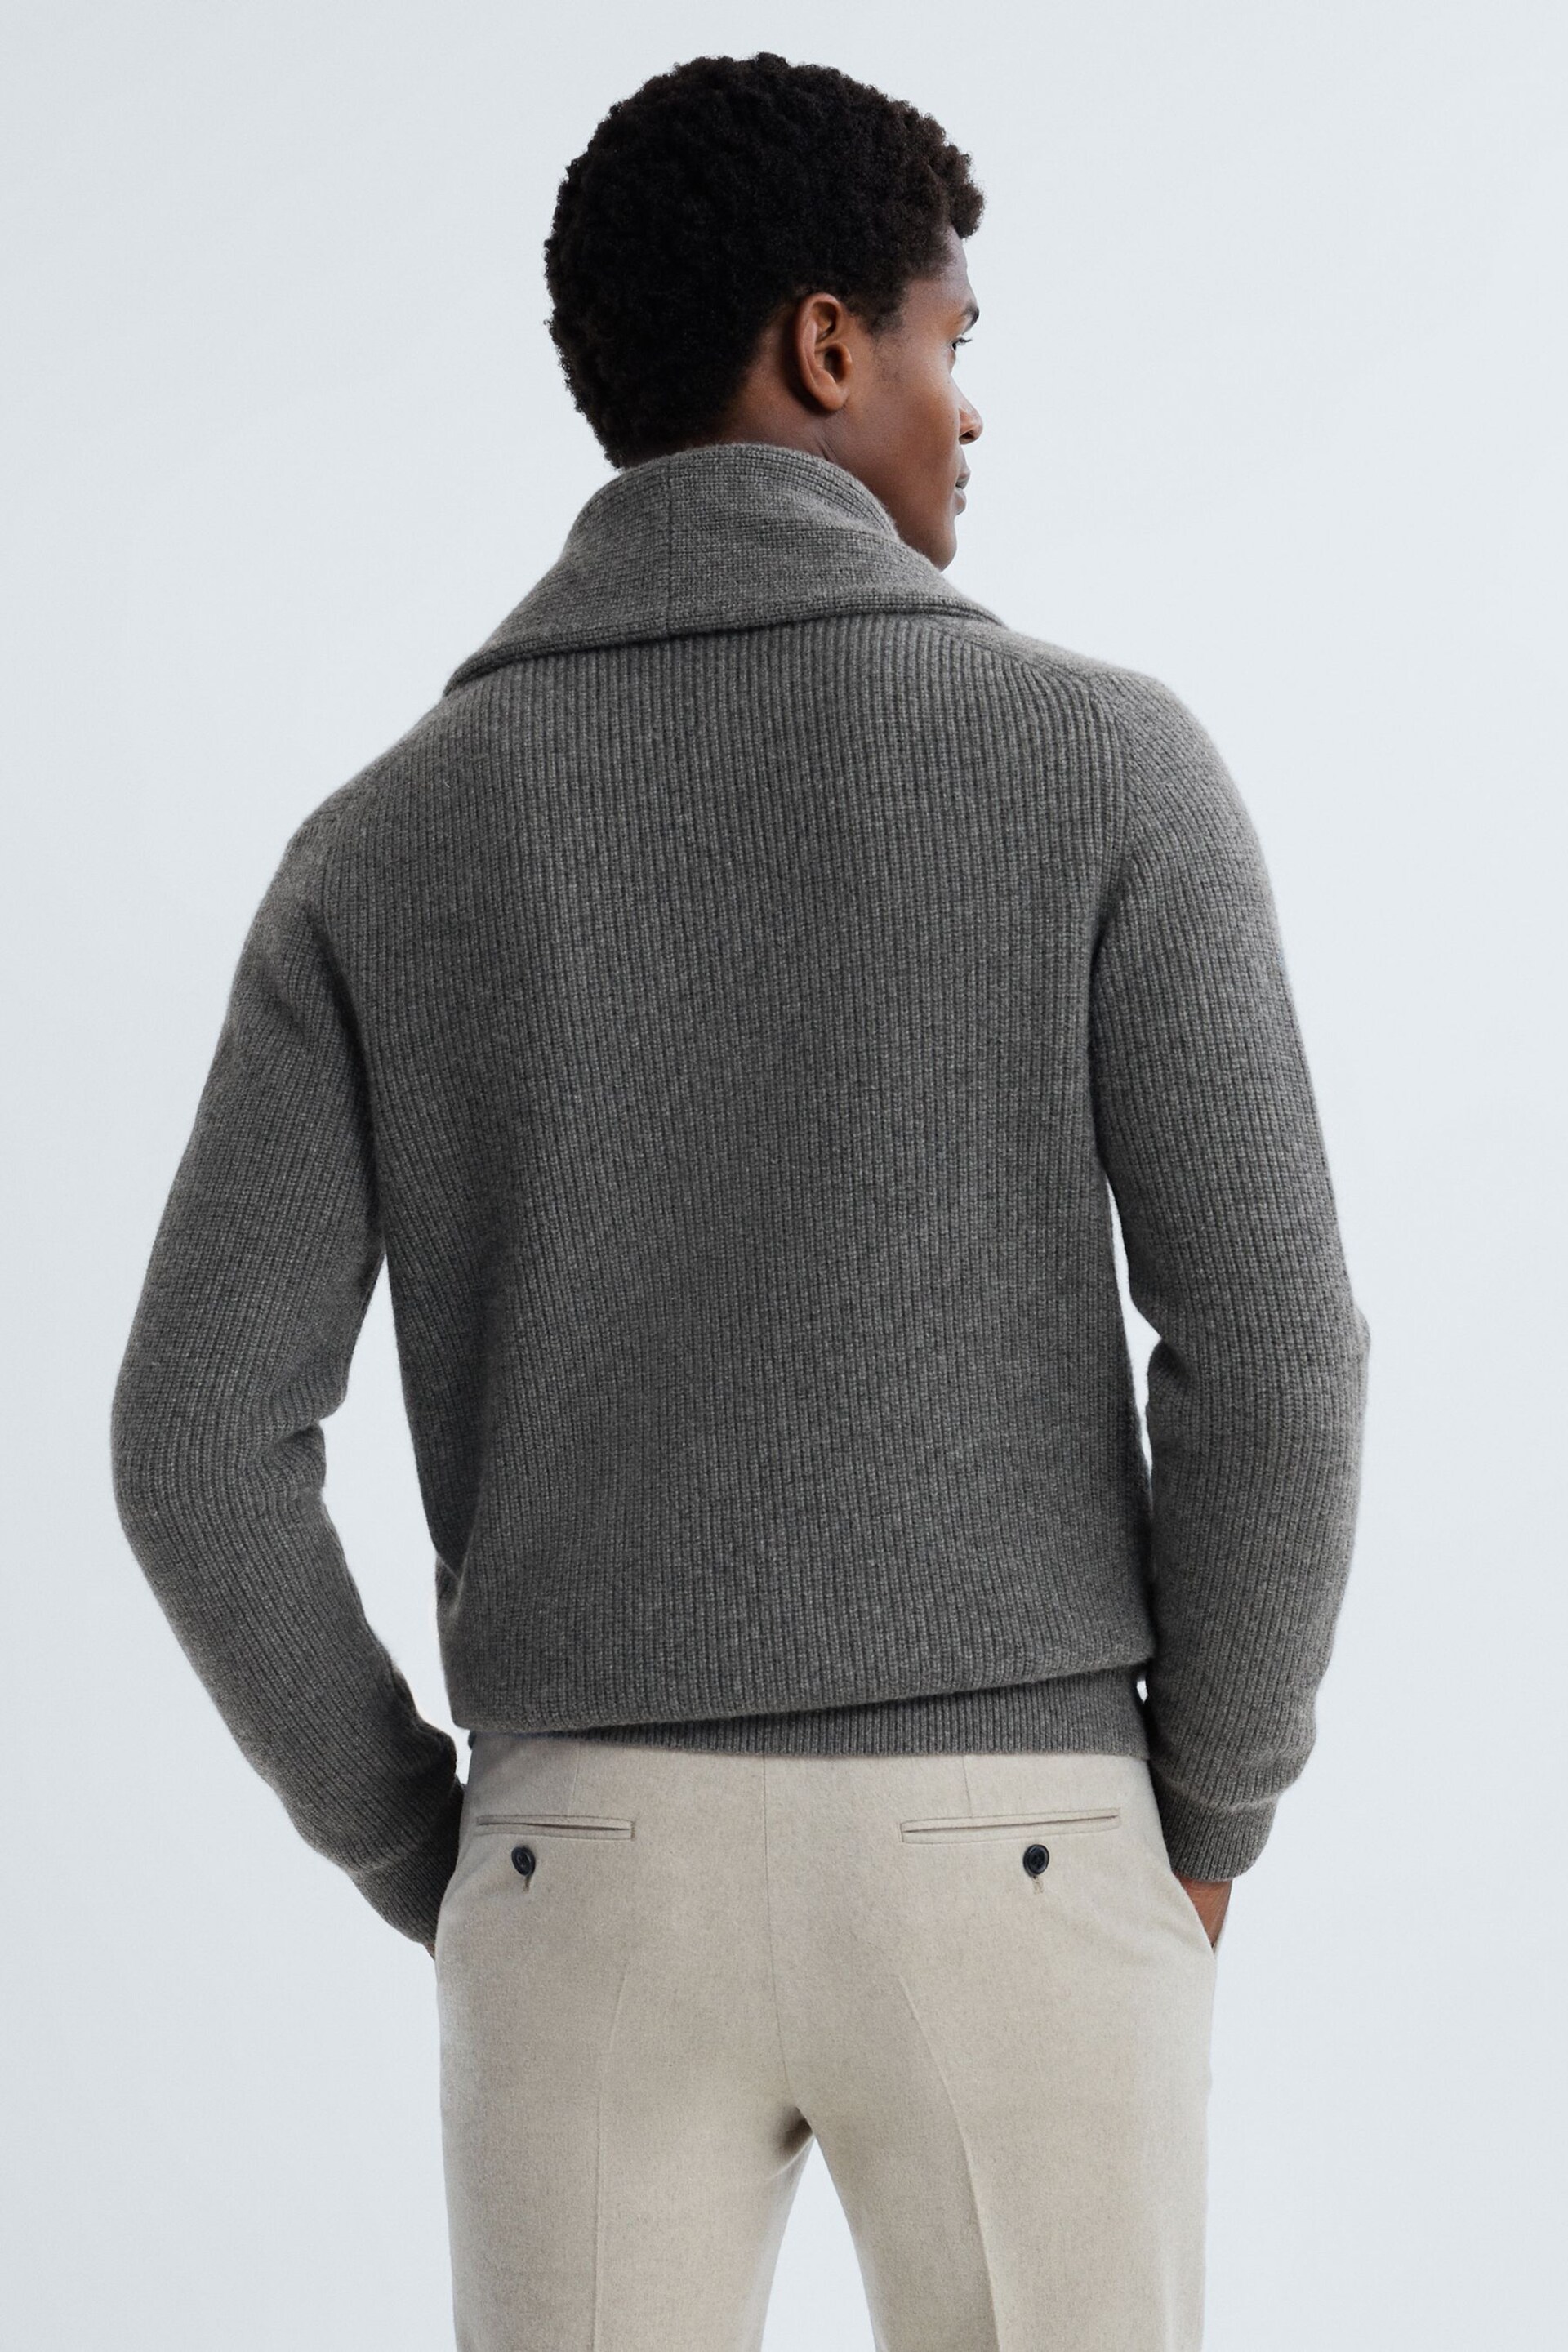 Reiss Charcoal Melange King Cashmere Button-Through Cardigan - Image 5 of 7